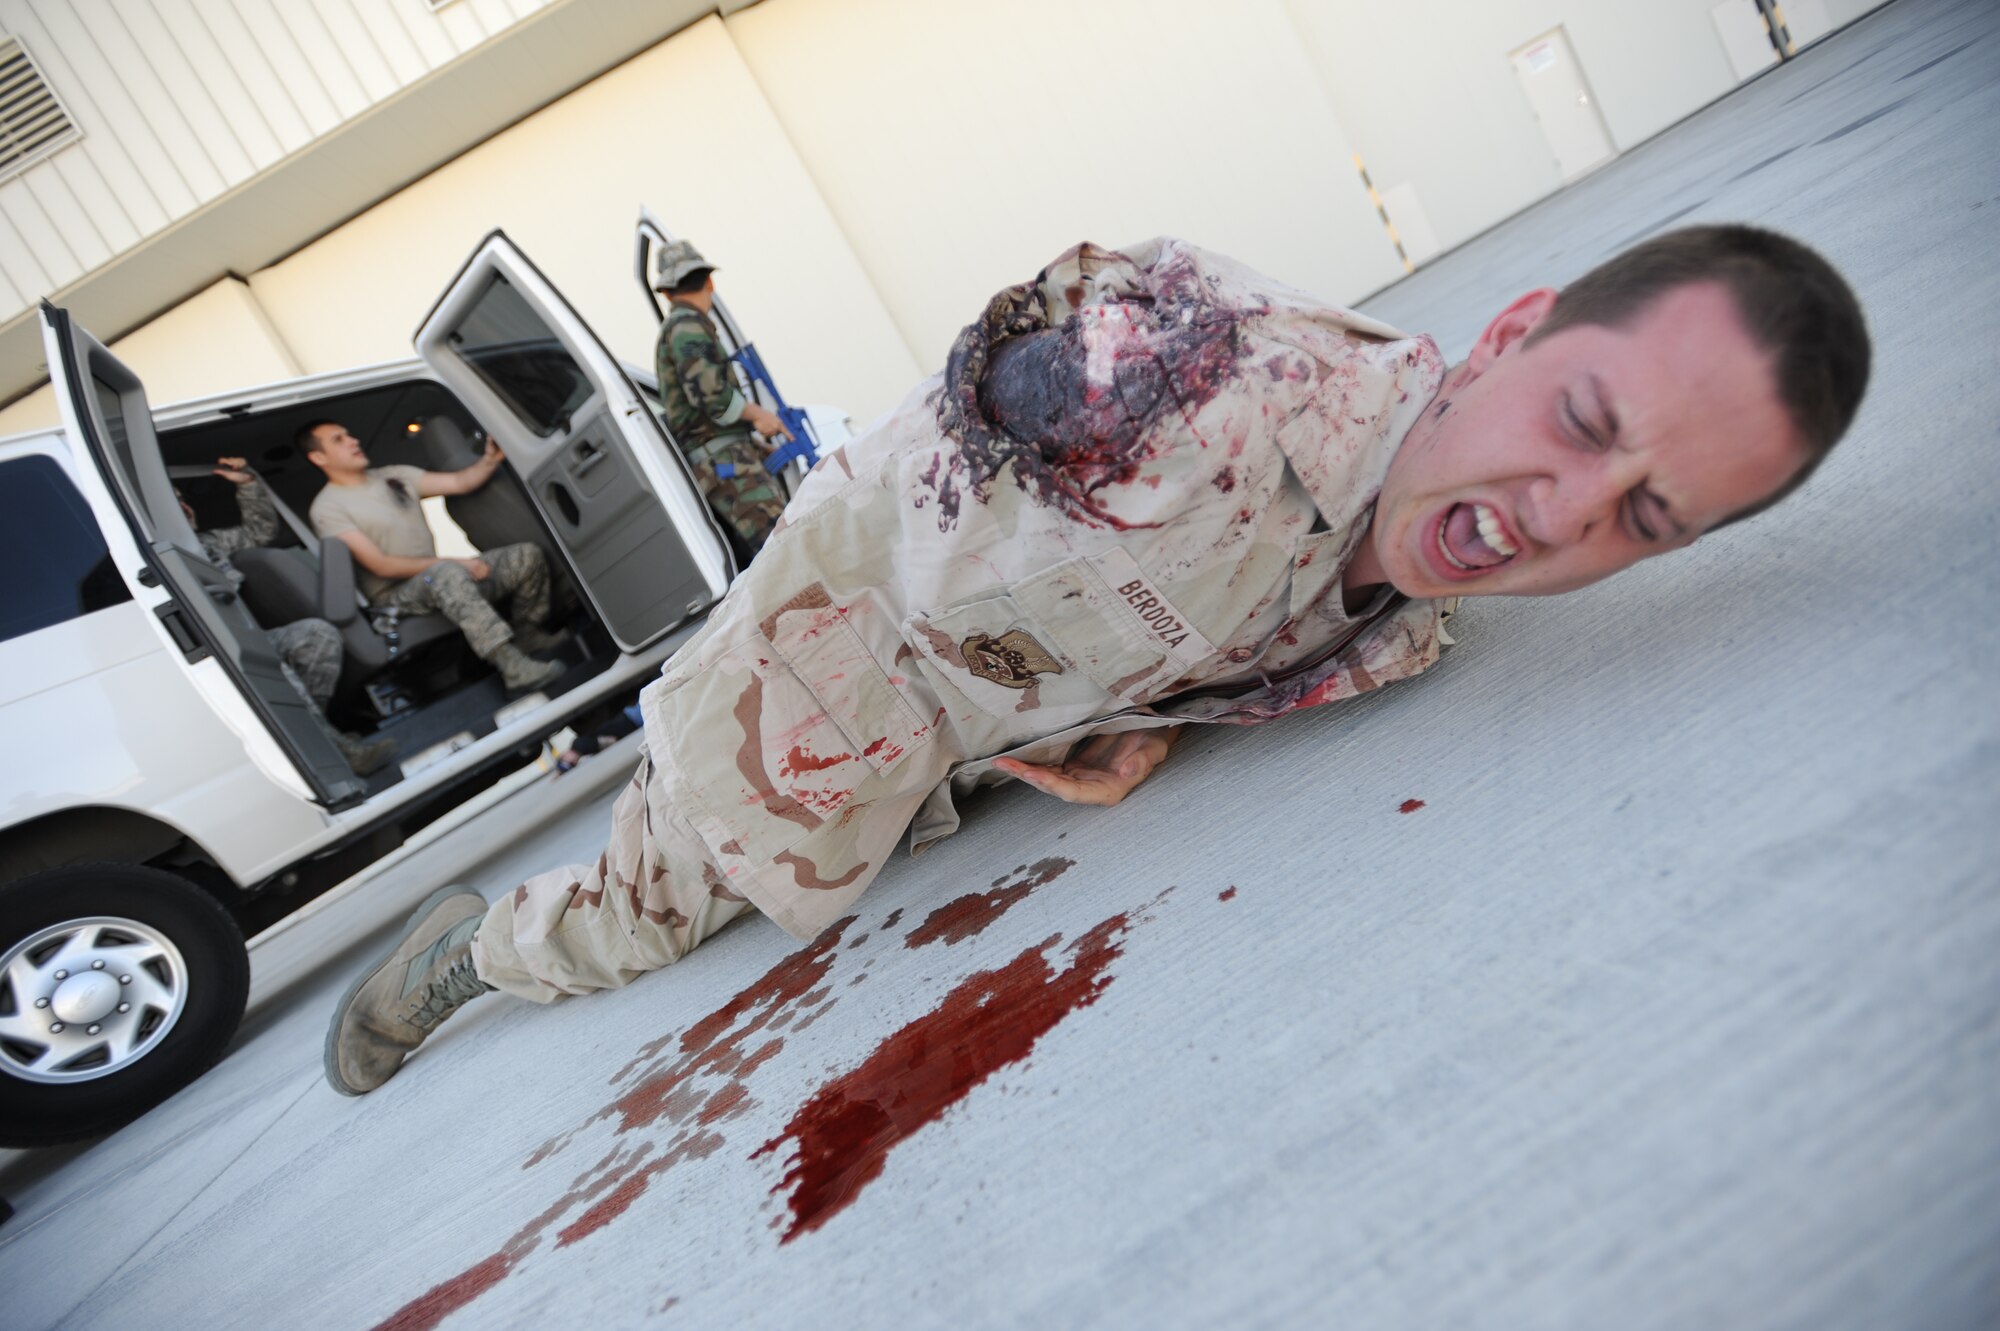 An Airman screams for help while wearing moulage to simulate losing an arm during an active shooter exercise at Creech Air Force Base, Nev., March 25, 2014. The exercise with Nellis Air Force Base, Nev., allowed first responders and medical personnel to receive realistic training. (U.S. Air Force photo by Staff Sgt. Nadine Barclay/Released)